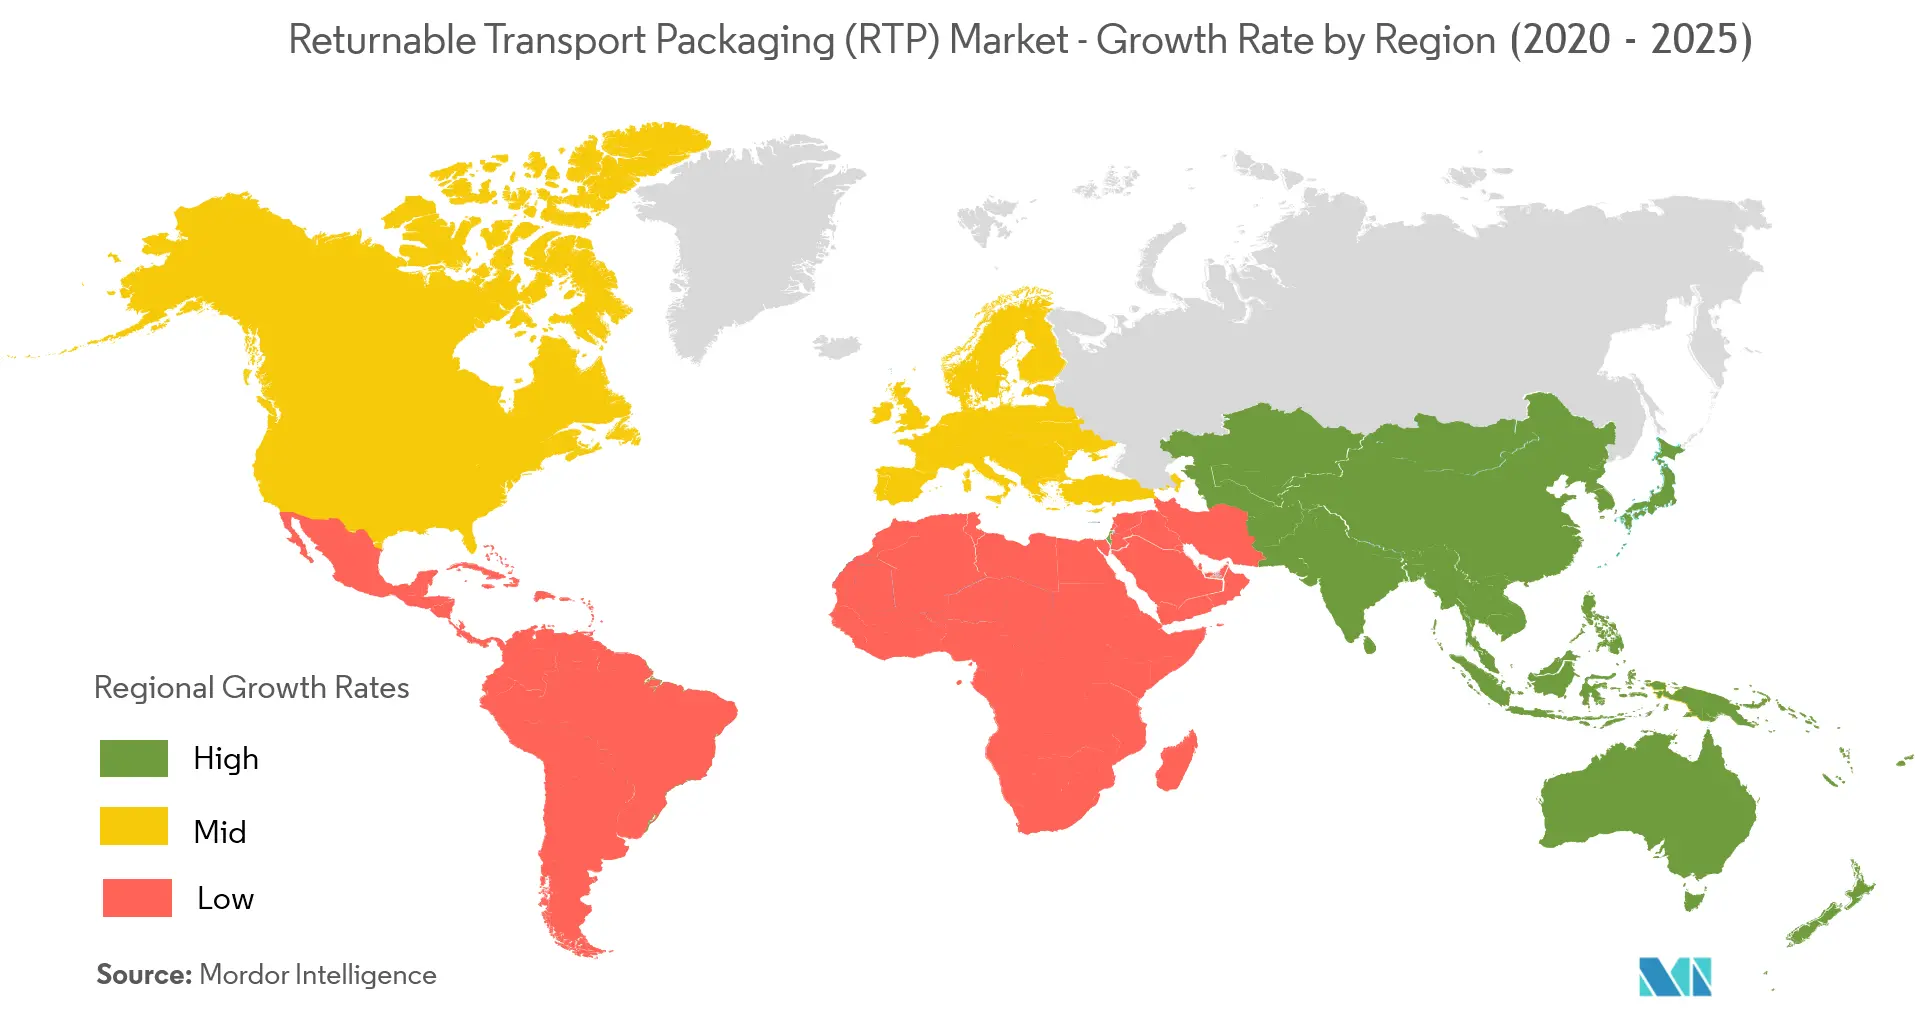 Returnable Transport Packaging (RTP) Market- Growth Rate by Region (2020 - 2025)